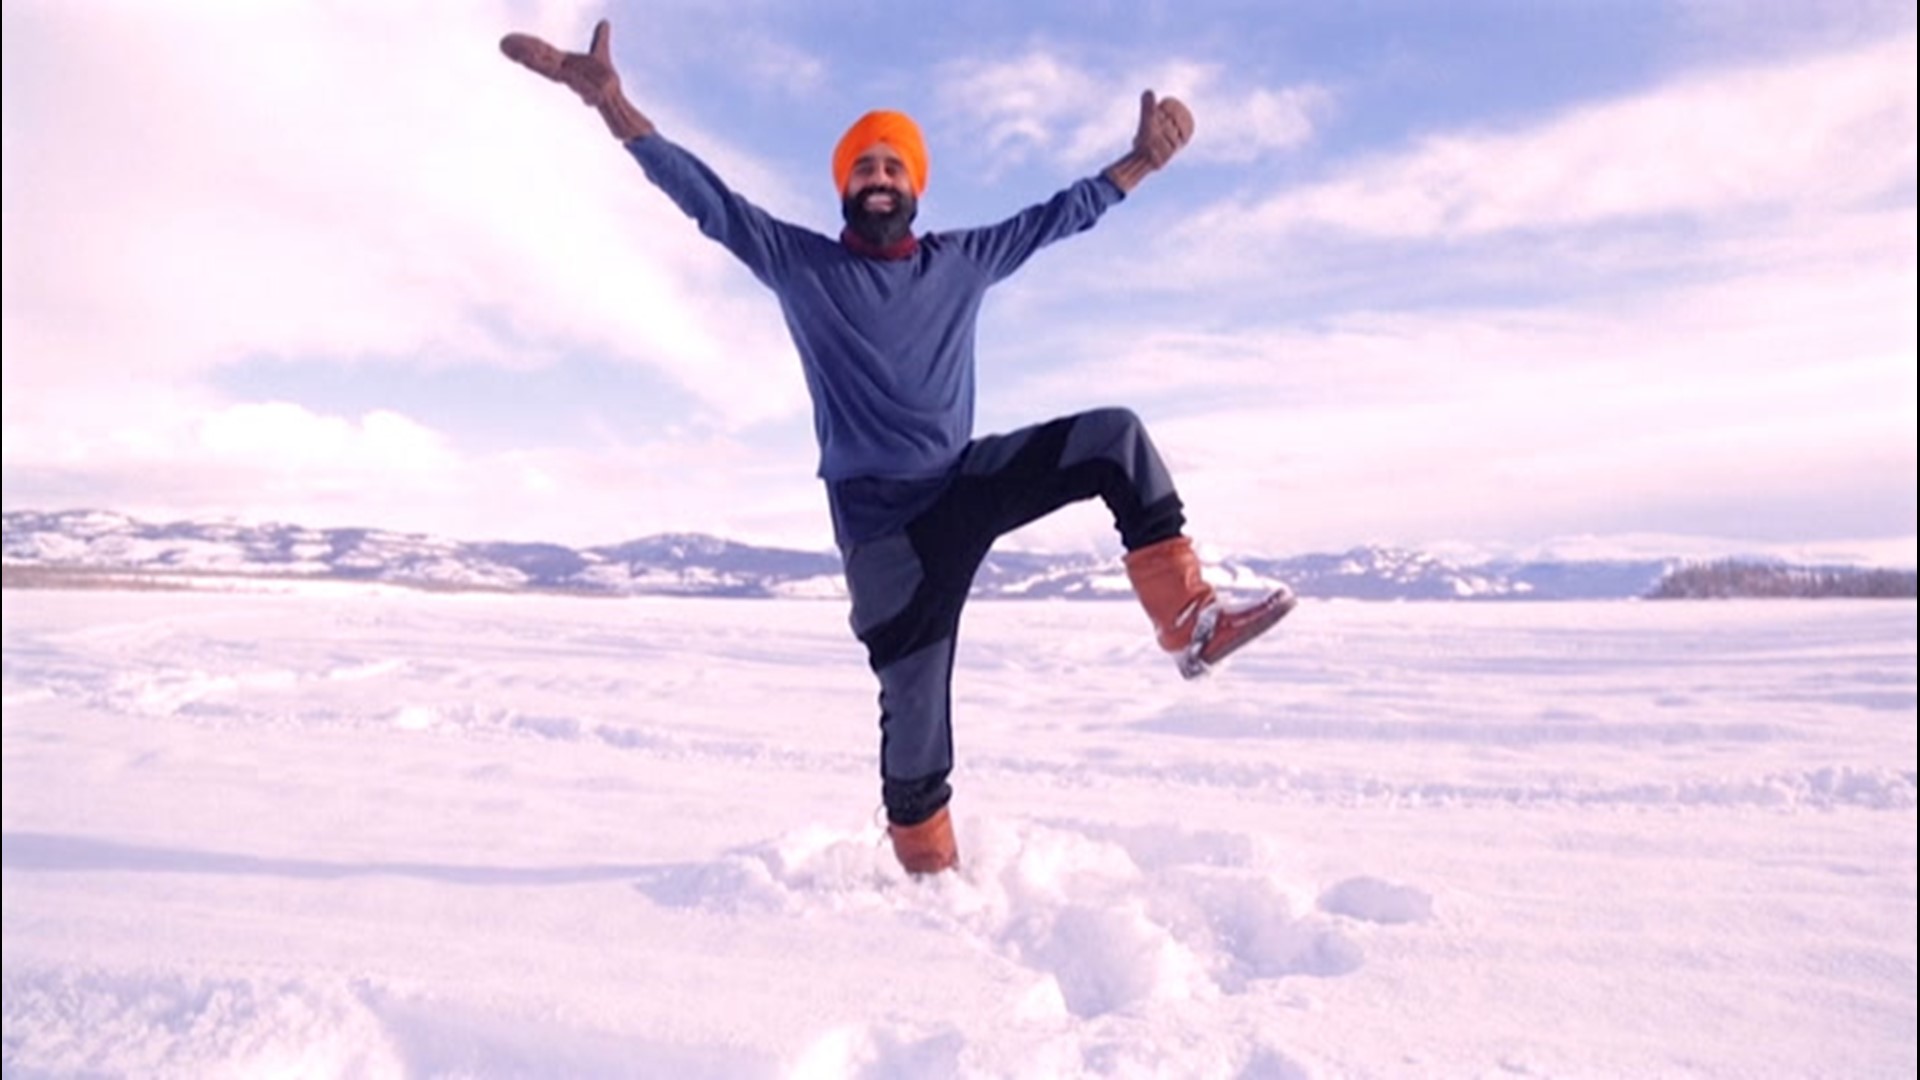 After Gurdeep Pandher received his COVID-19 vaccine on the first day of March, he immediately went out to a frozen lake and danced Bhangra, a traditional Indian dance, to share his joy with others.